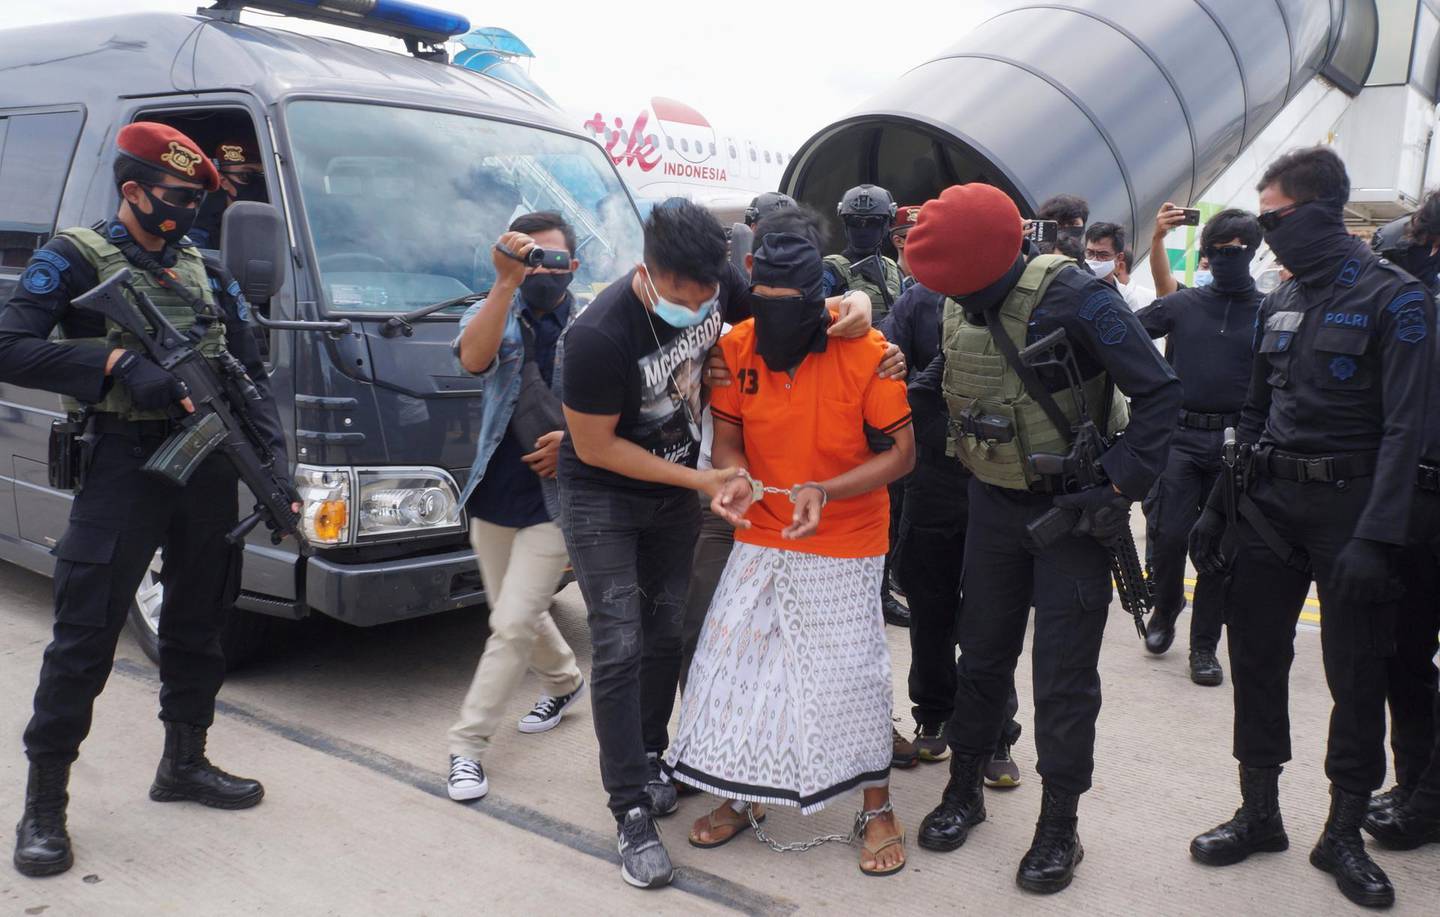 Police escort 57-year-old Zulkarnaen, a senior leader of the Al-Qaeda-linked Jemaah Islamiyah (JI), who had been on the run for his alleged role in the 2002 Bali bombings, upon arrival at Jakarta’s Soekarno-Hatta International Airport in Tangerang on December 16, 2020. (Photo by FAJRIN RAHARJO / AFP)